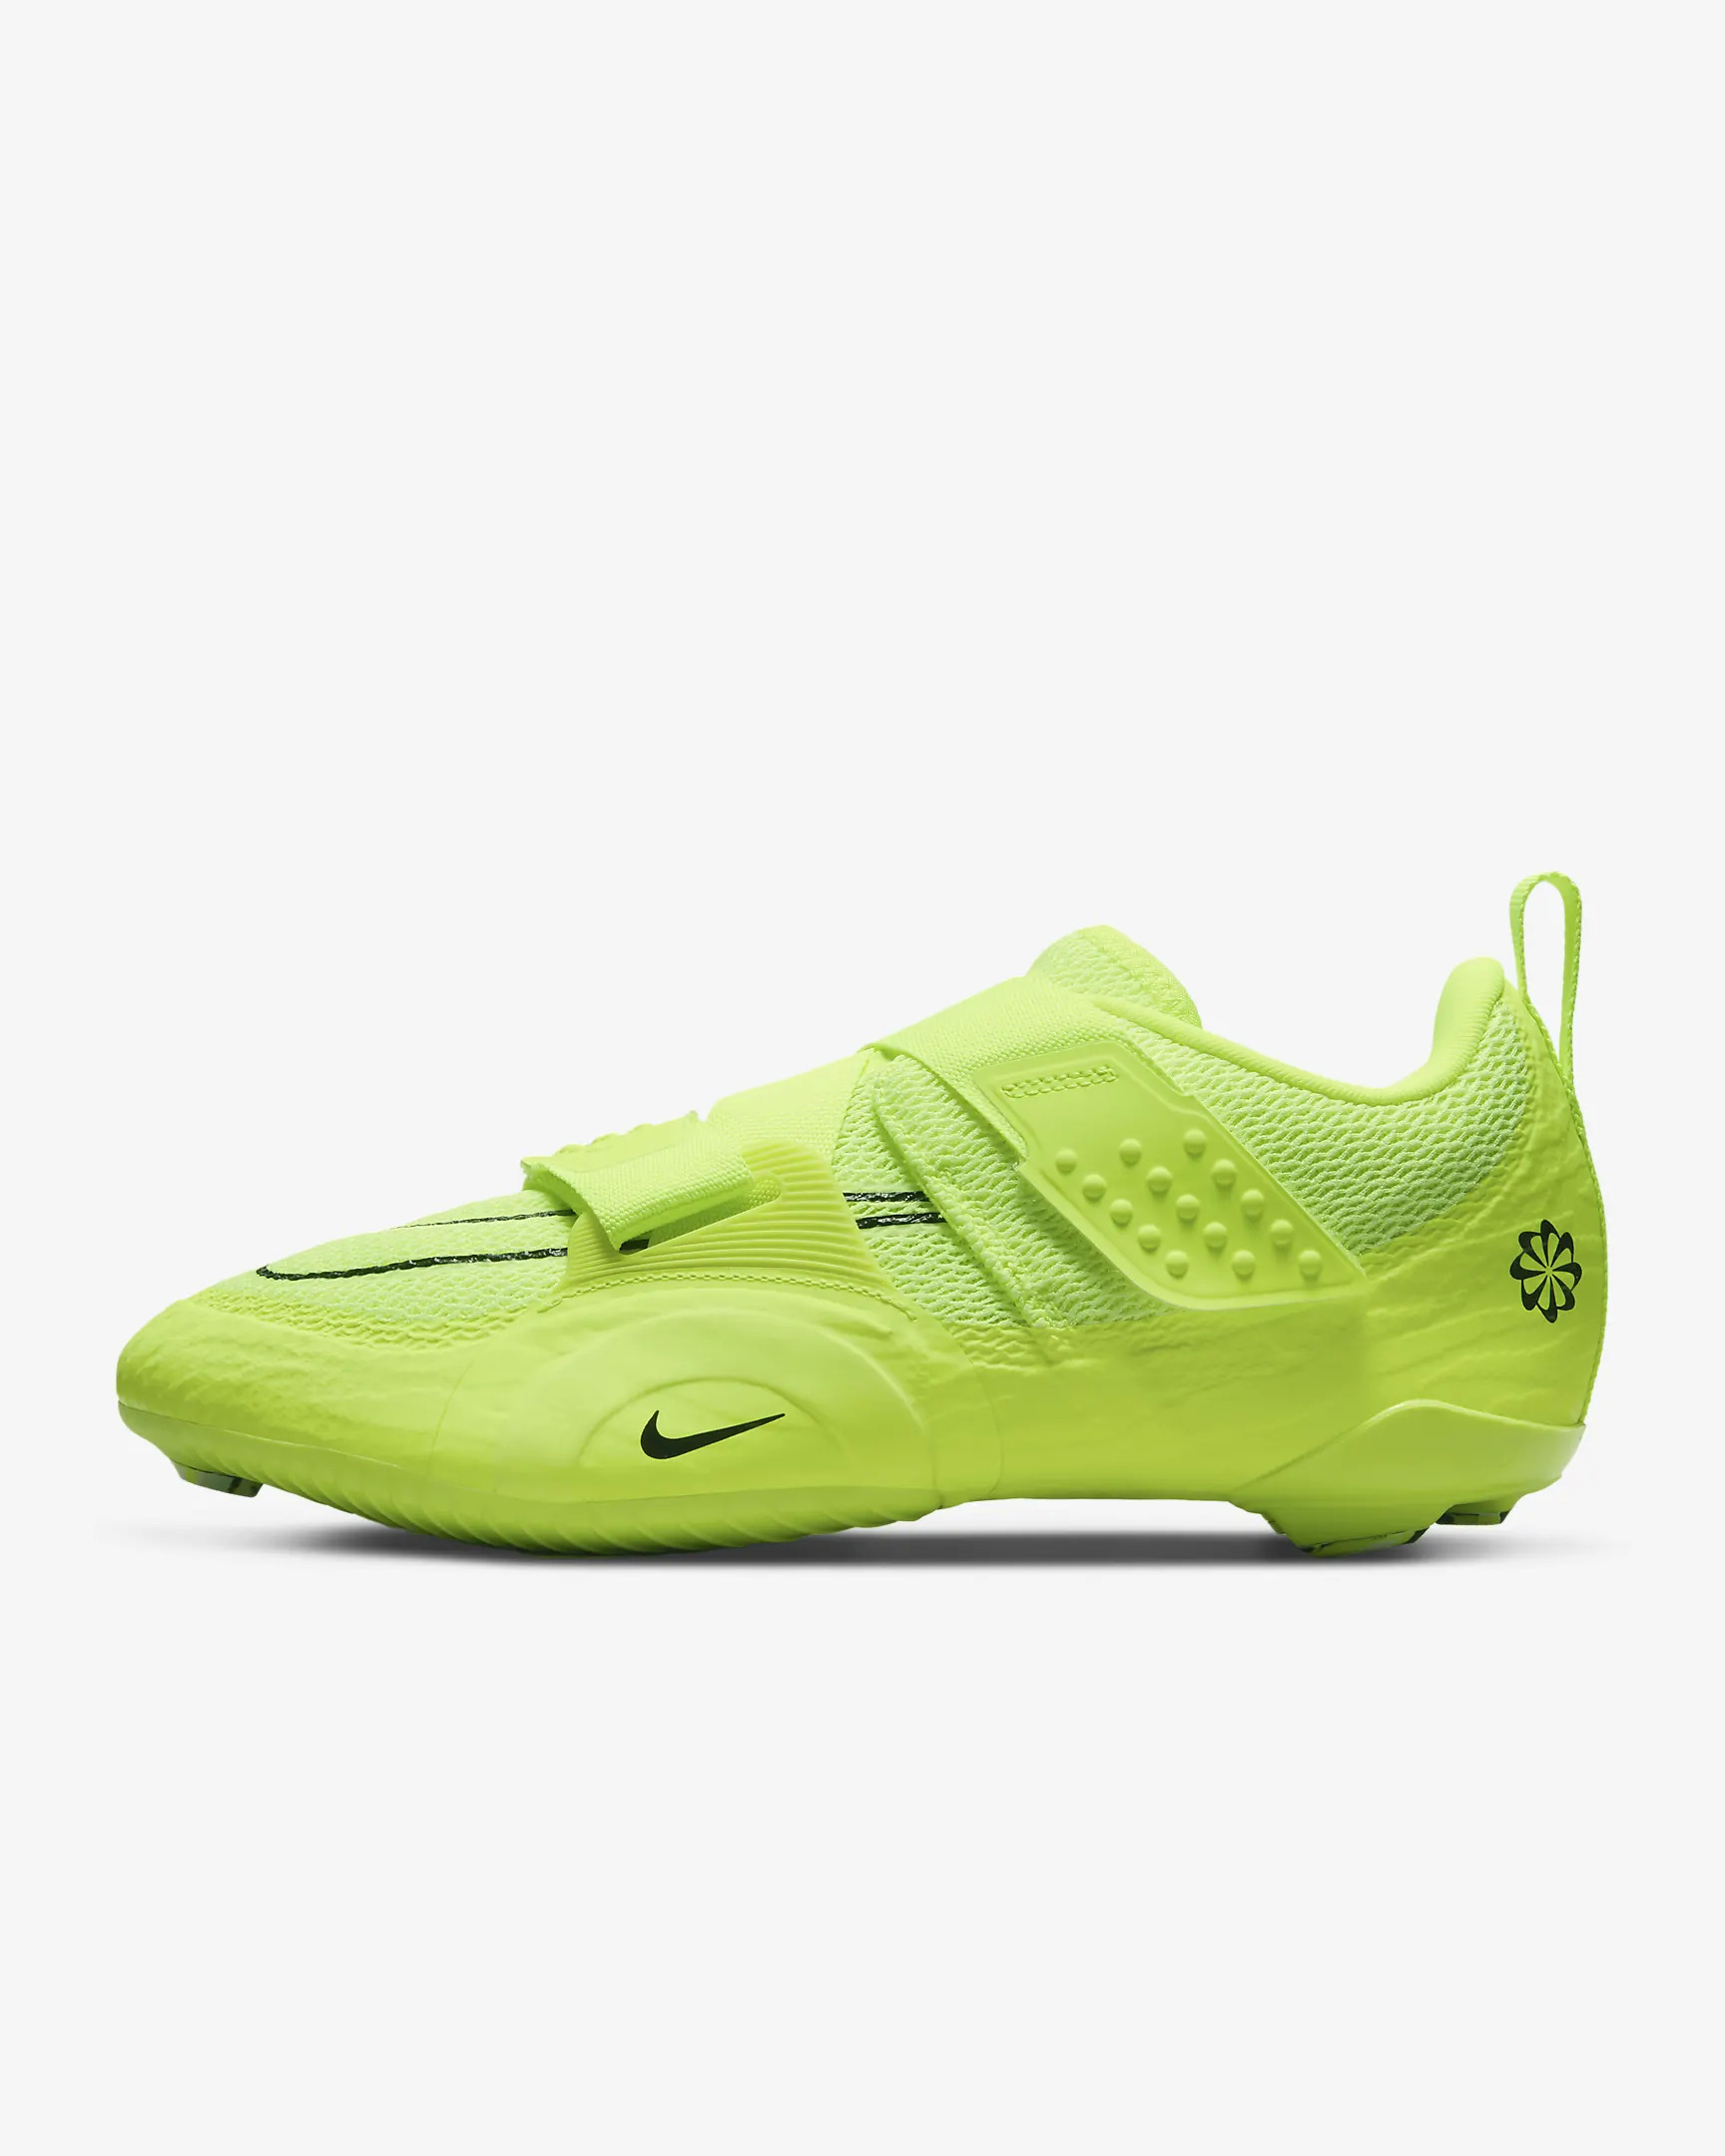 Nike SuperRep Cycle 2 Next Nature Indoor Cycling Shoes $58.38